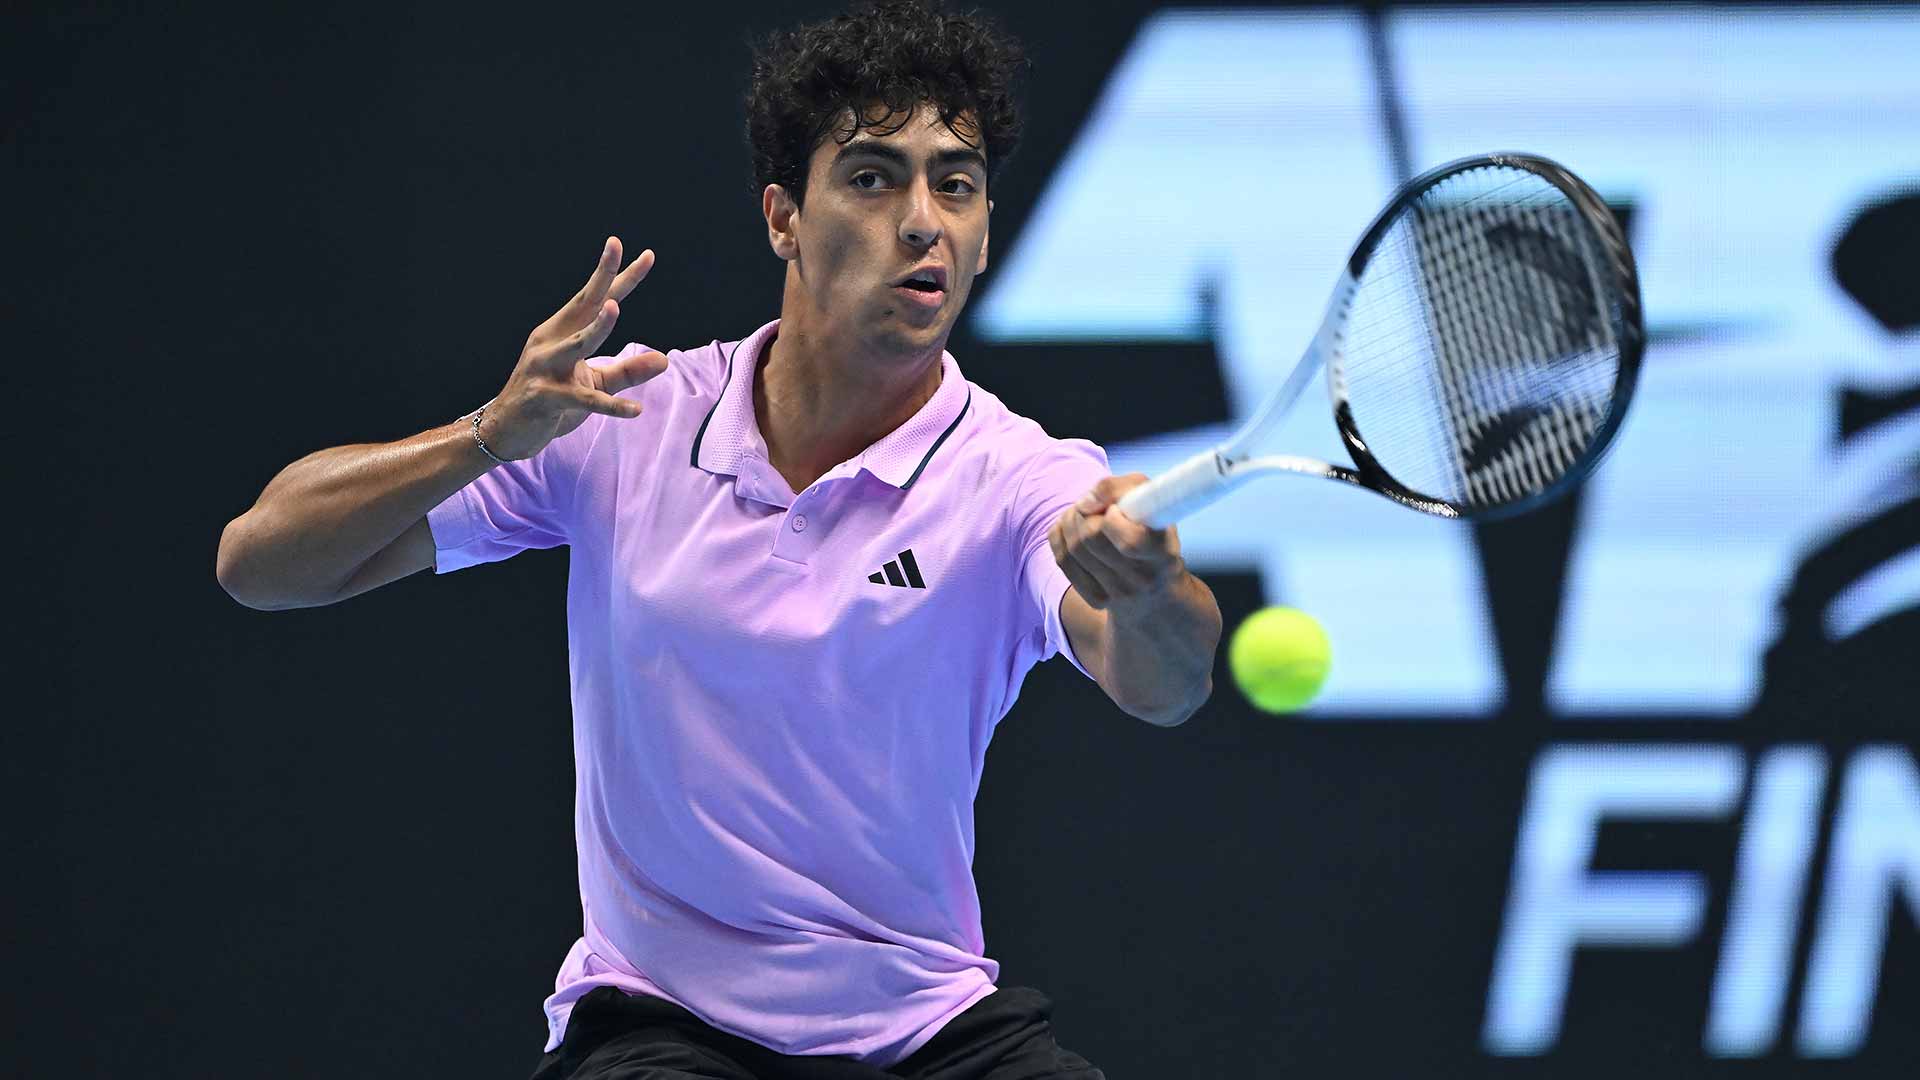 Abdullah Shelbayh captures his first win at the Next Gen ATP Finals on Wednesday.